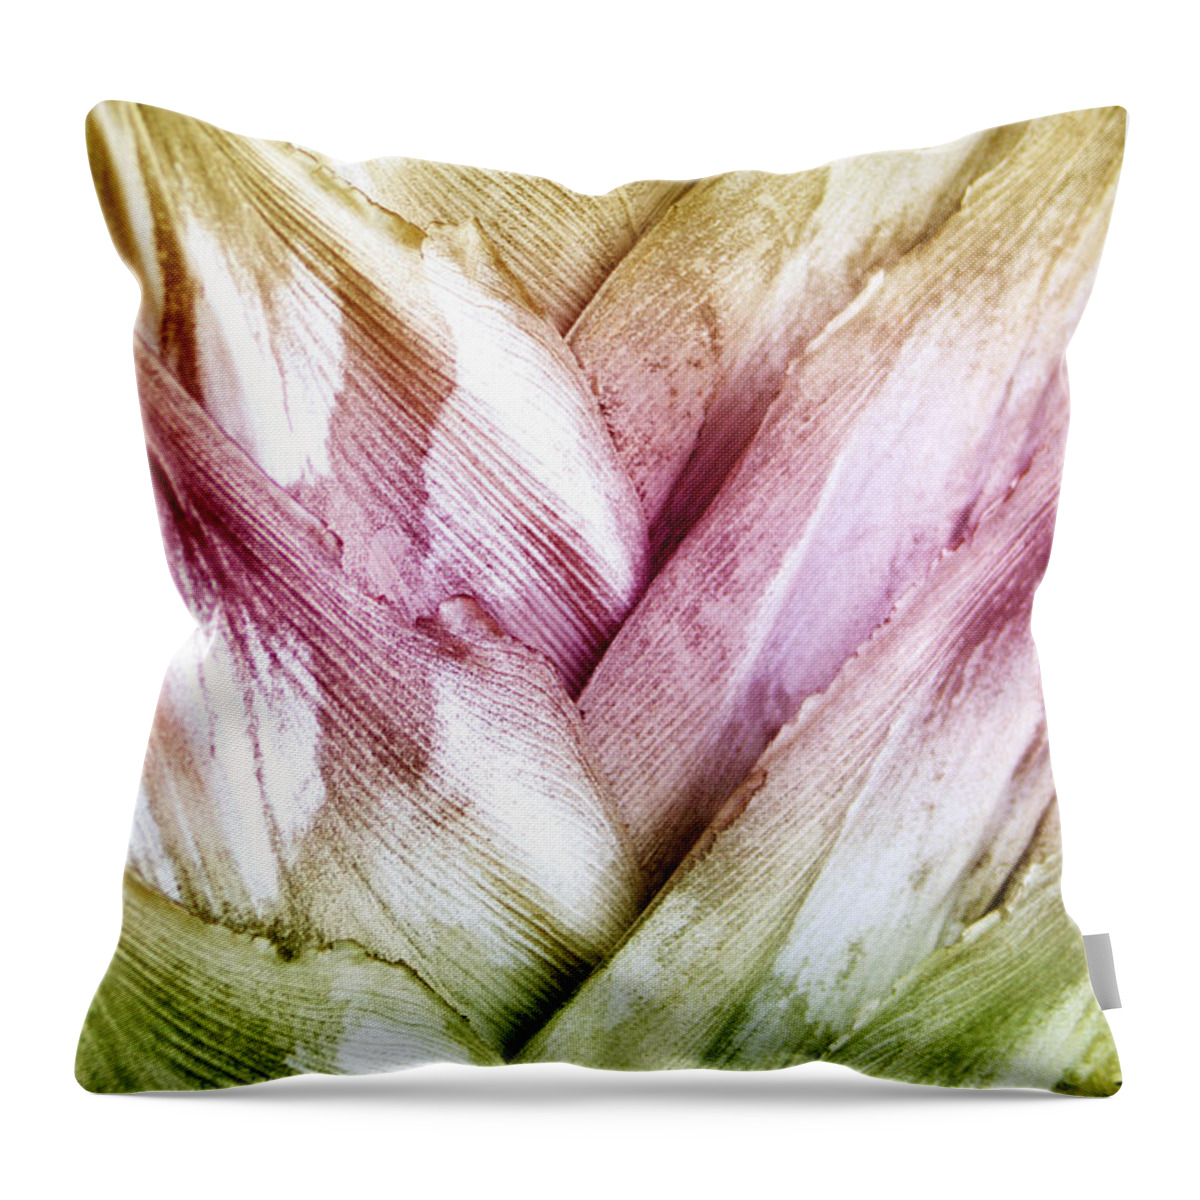 Nature Throw Pillow featuring the photograph Interwoven Hues by Holly Kempe